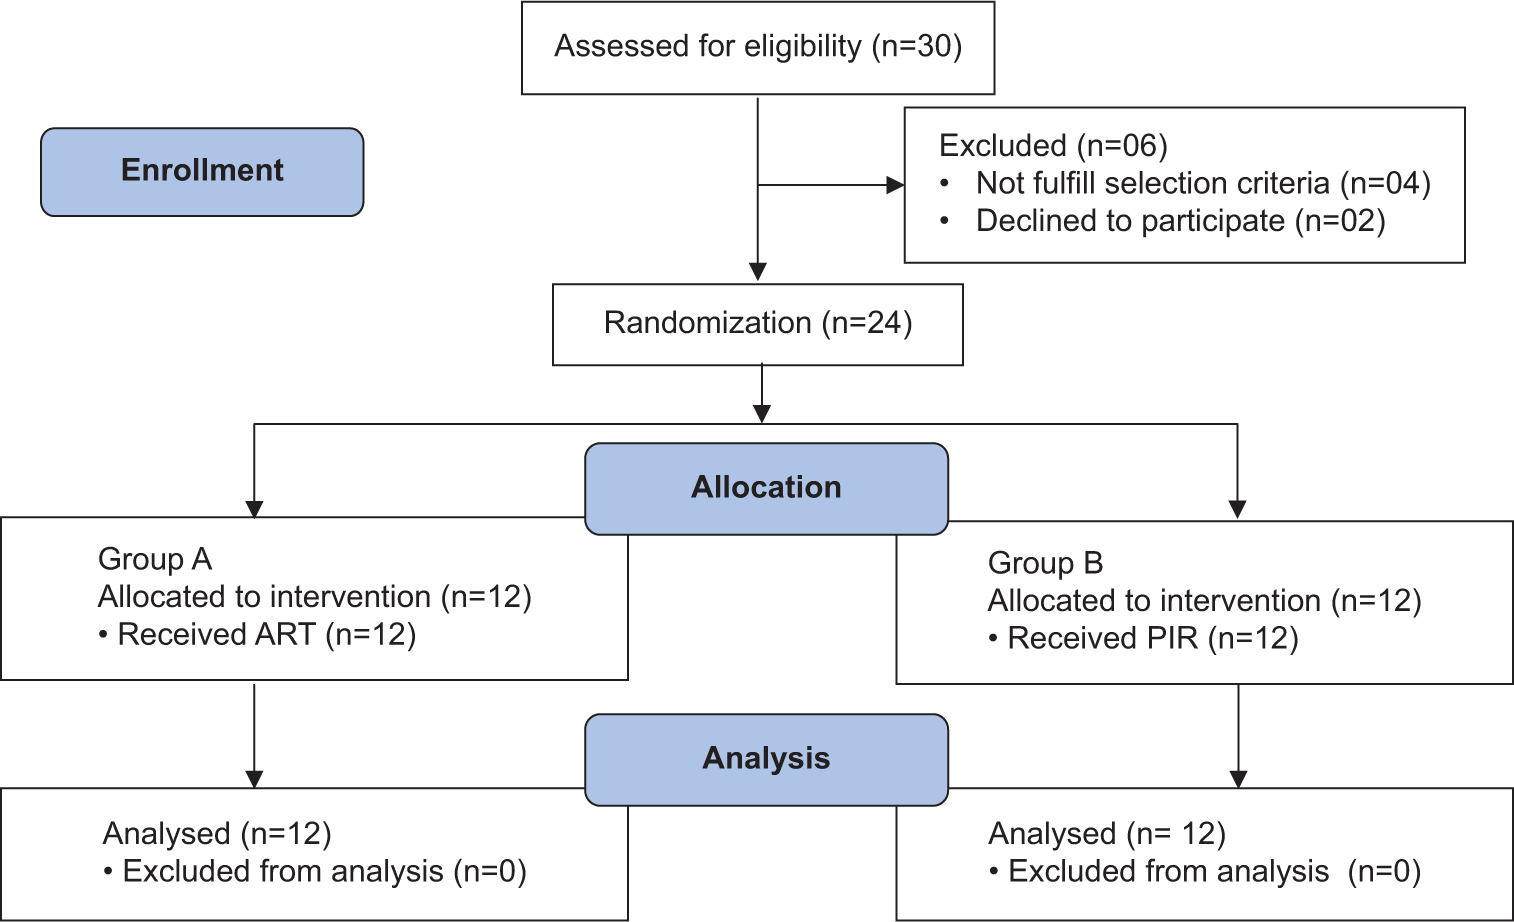 Consolidated standards of reporting trials flow diagram. ART: Active release technique, PIR: Post isometric relaxation, n: total number of participants